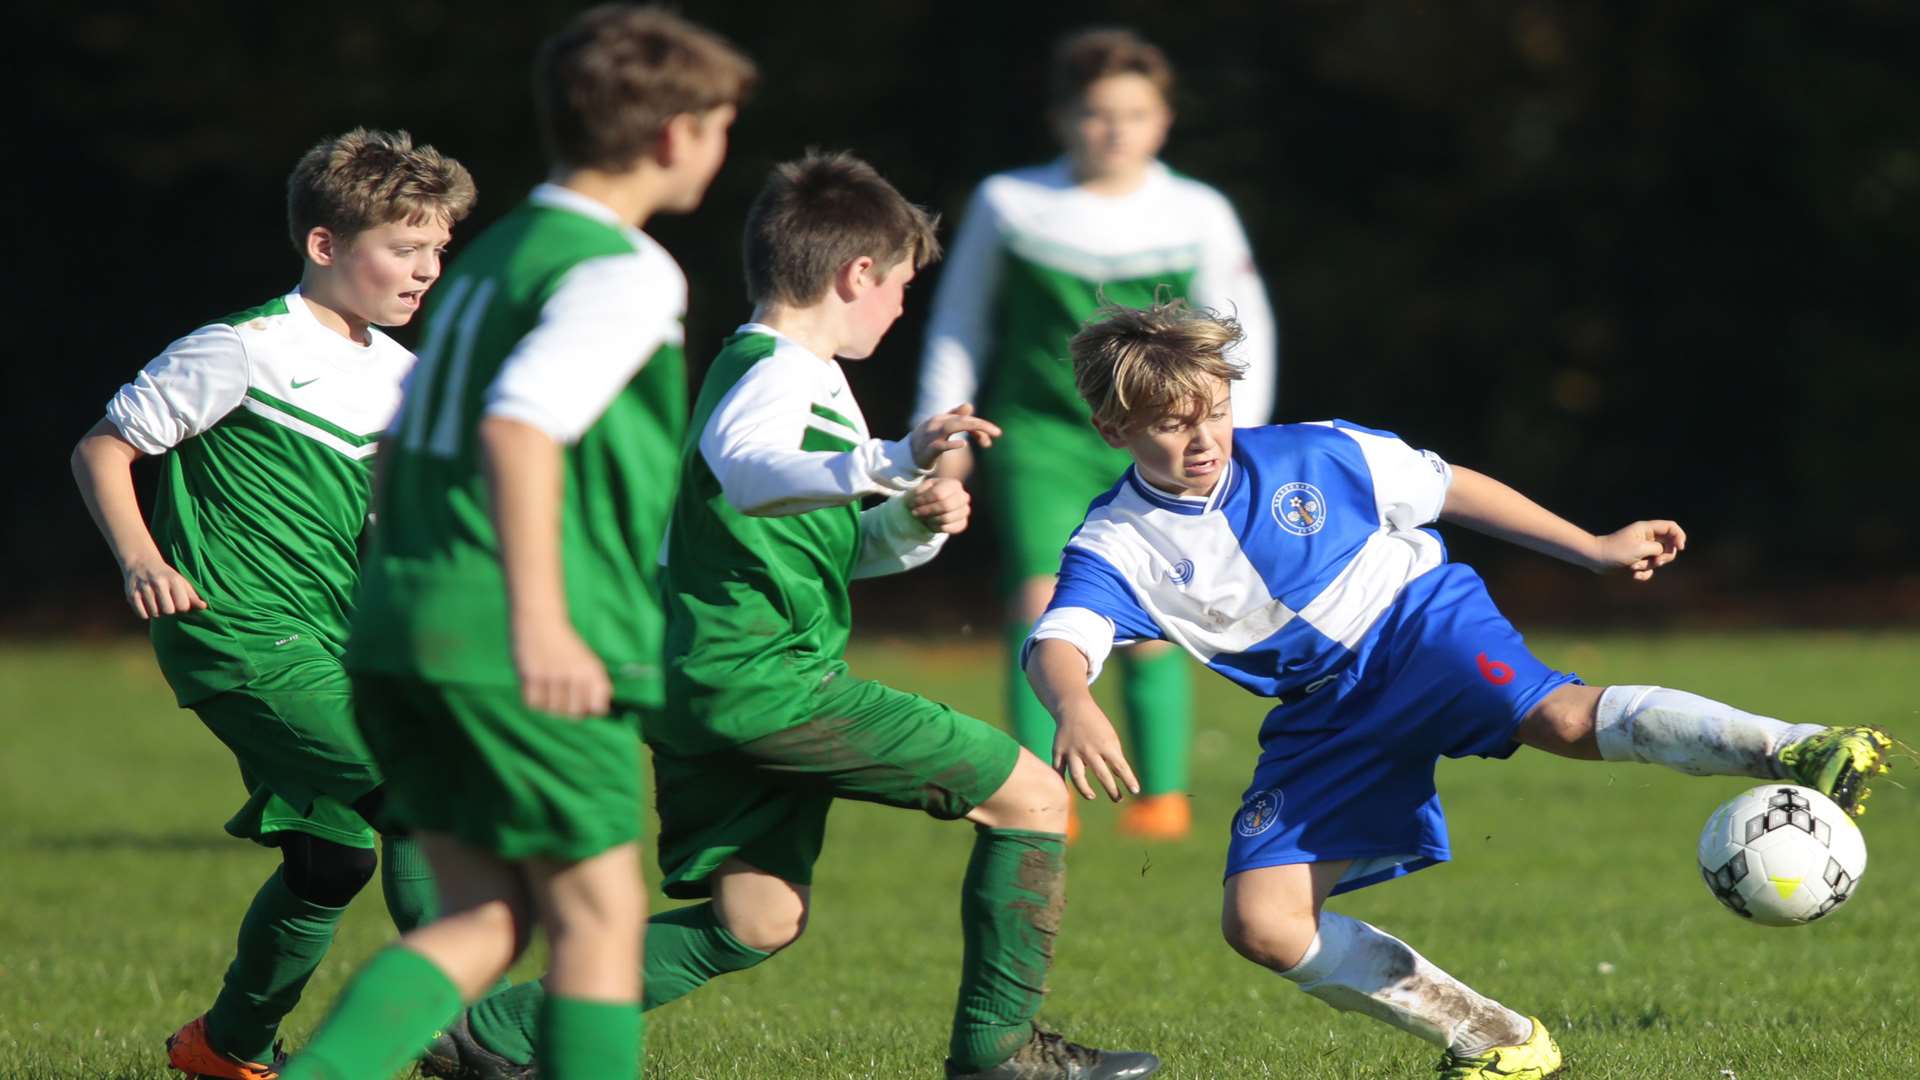 Bredhurst Juniors outnumbered by New Ash Green in Under-13 Division 2 Picture: Martin Apps